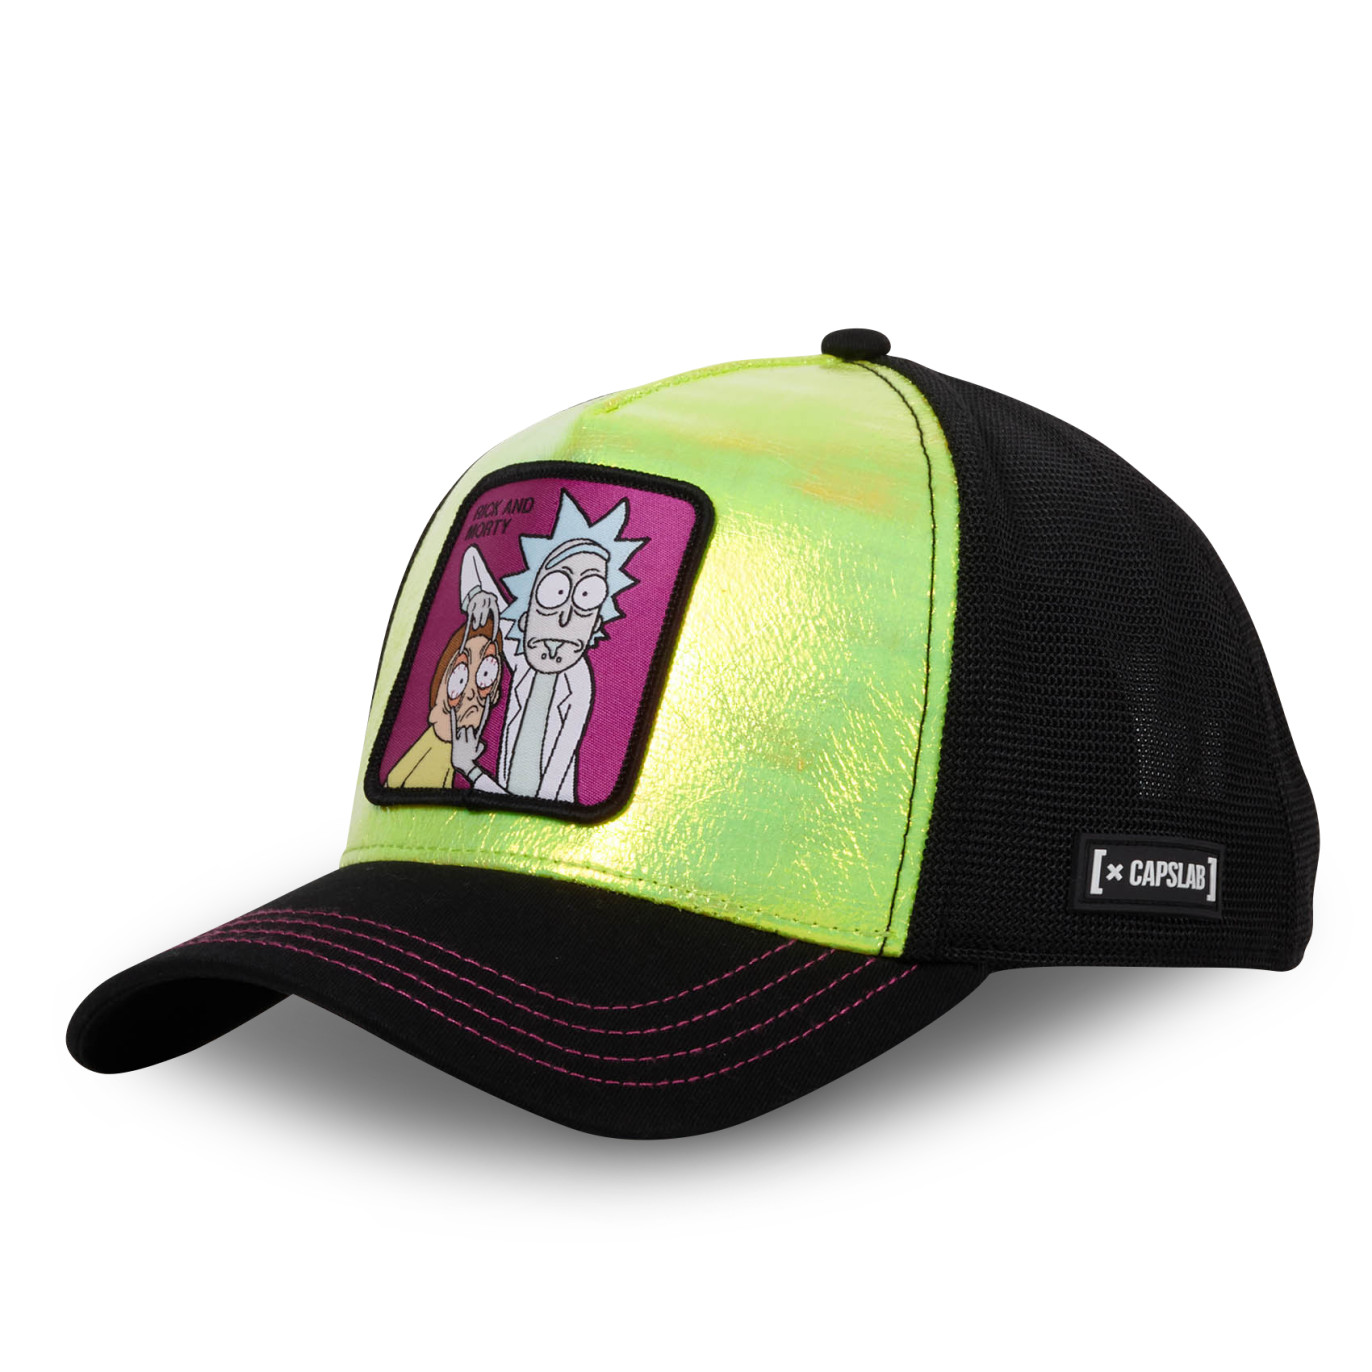 Casquette Trucker Rick And Morty Snapback - Verte - Capslab Capslab - 1